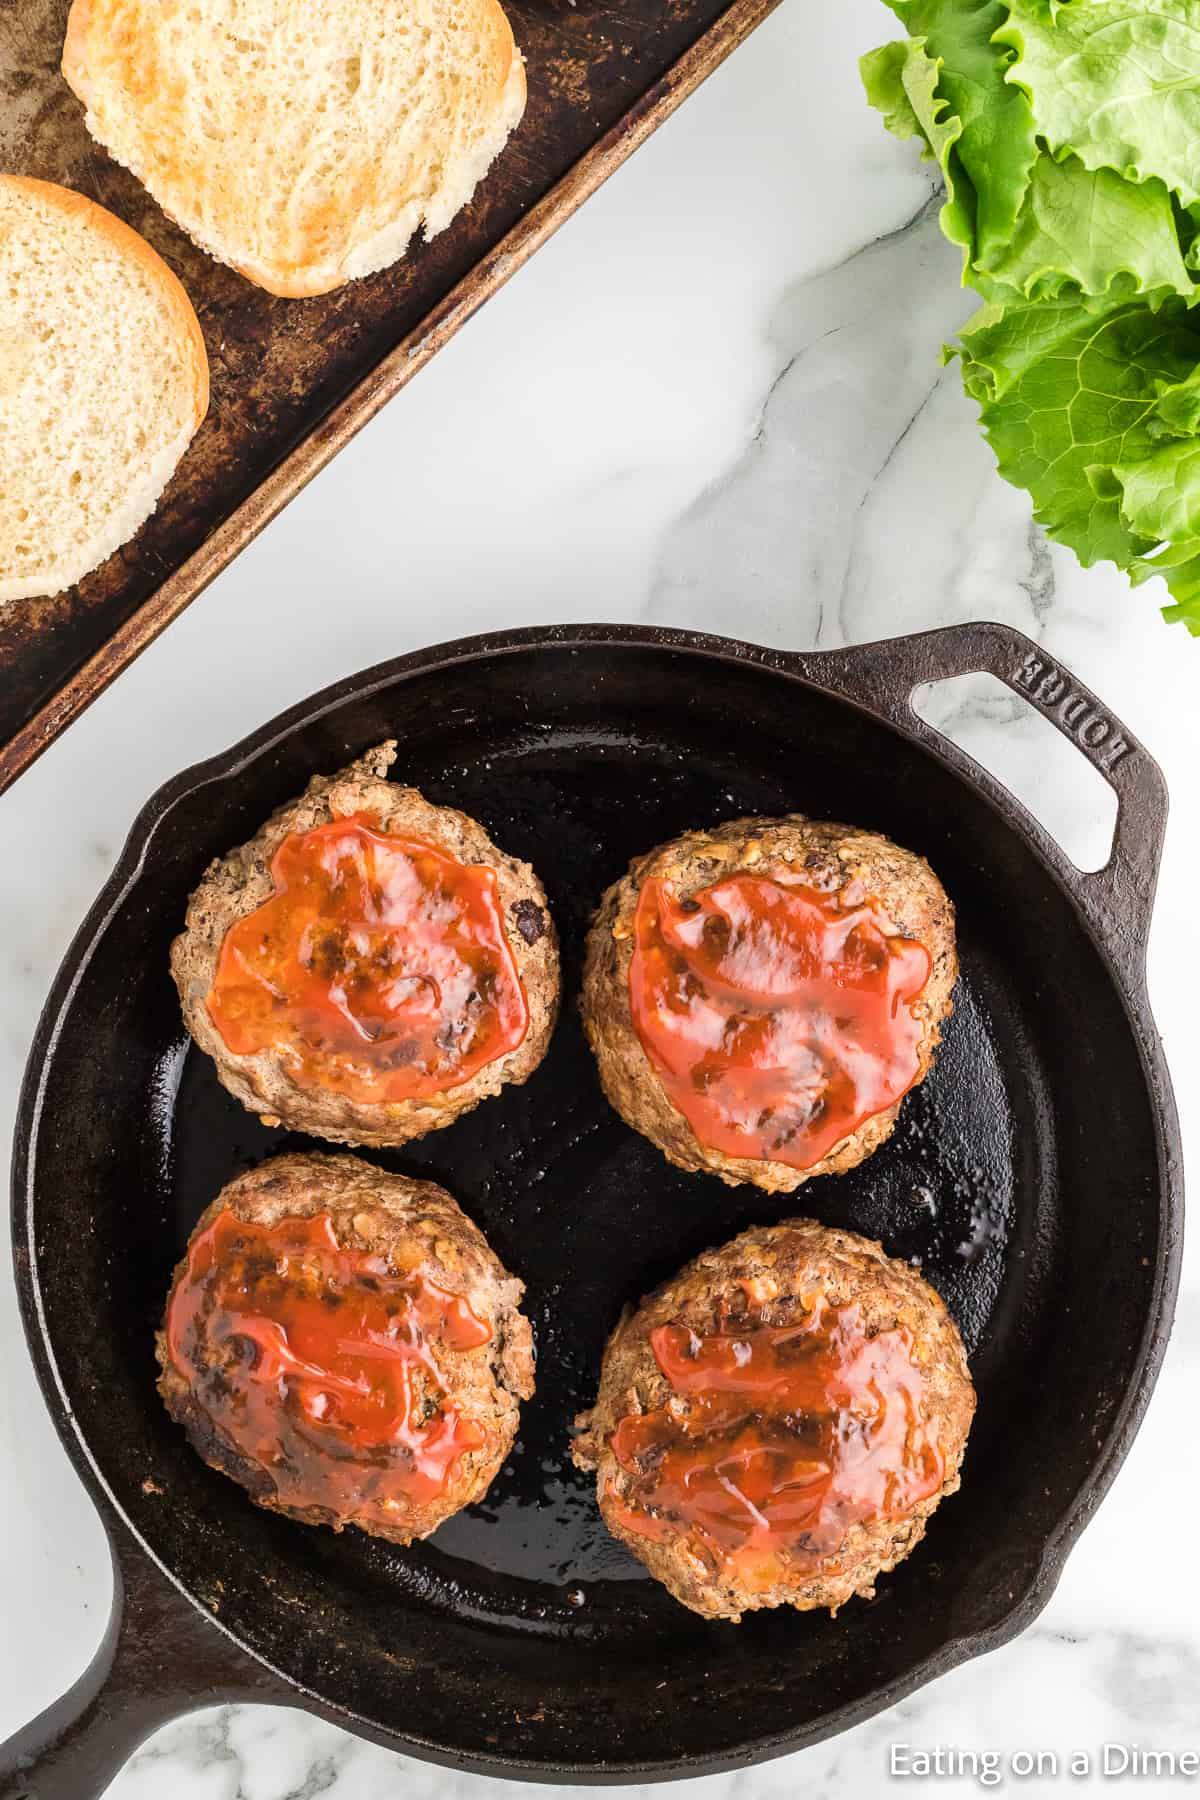 Cooked meatloaf burgers topped with sauce